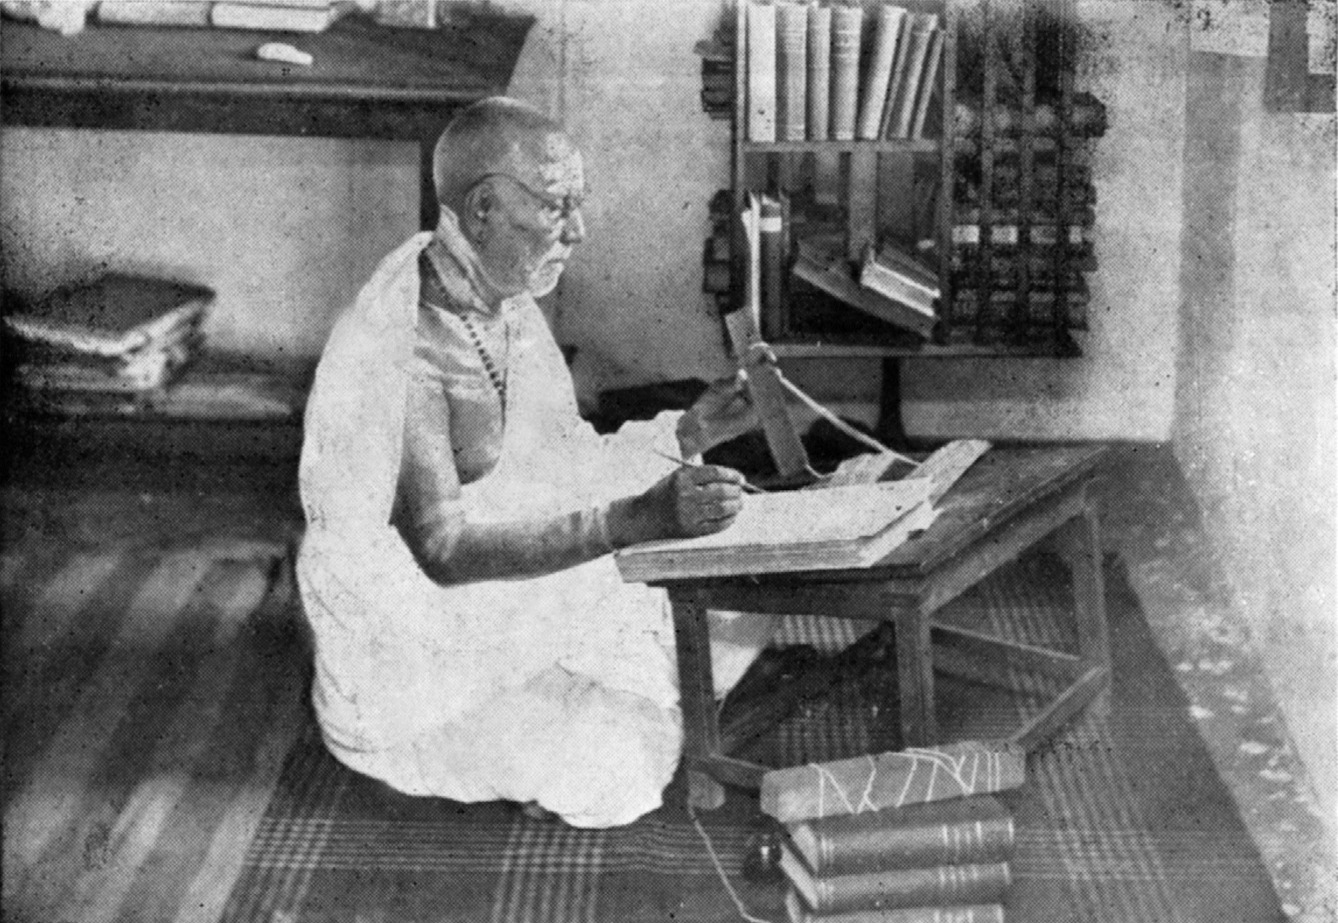 An old indian man (possibly a Hindu priest) sits cross-legged on the floor with a low writing desk infront of him, he reading a palm leaf manuscript in one hand and holding a pen over a paper book in the other, The room behind him had books and manuscripts on shelves and sideboards